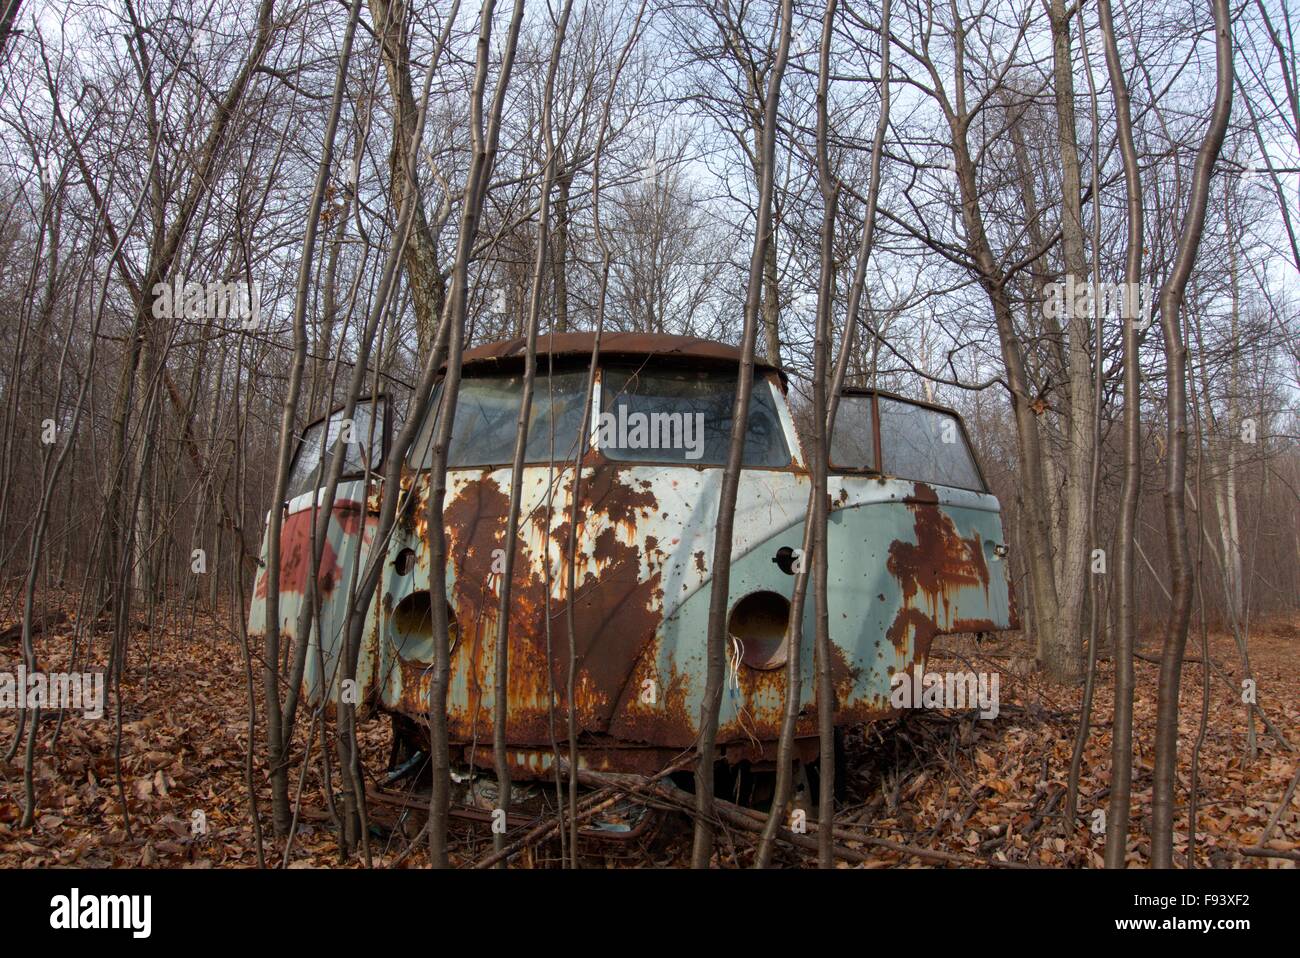 A decaying VW bus sits in the middle of the Pennsylvania forest. Stock Photo